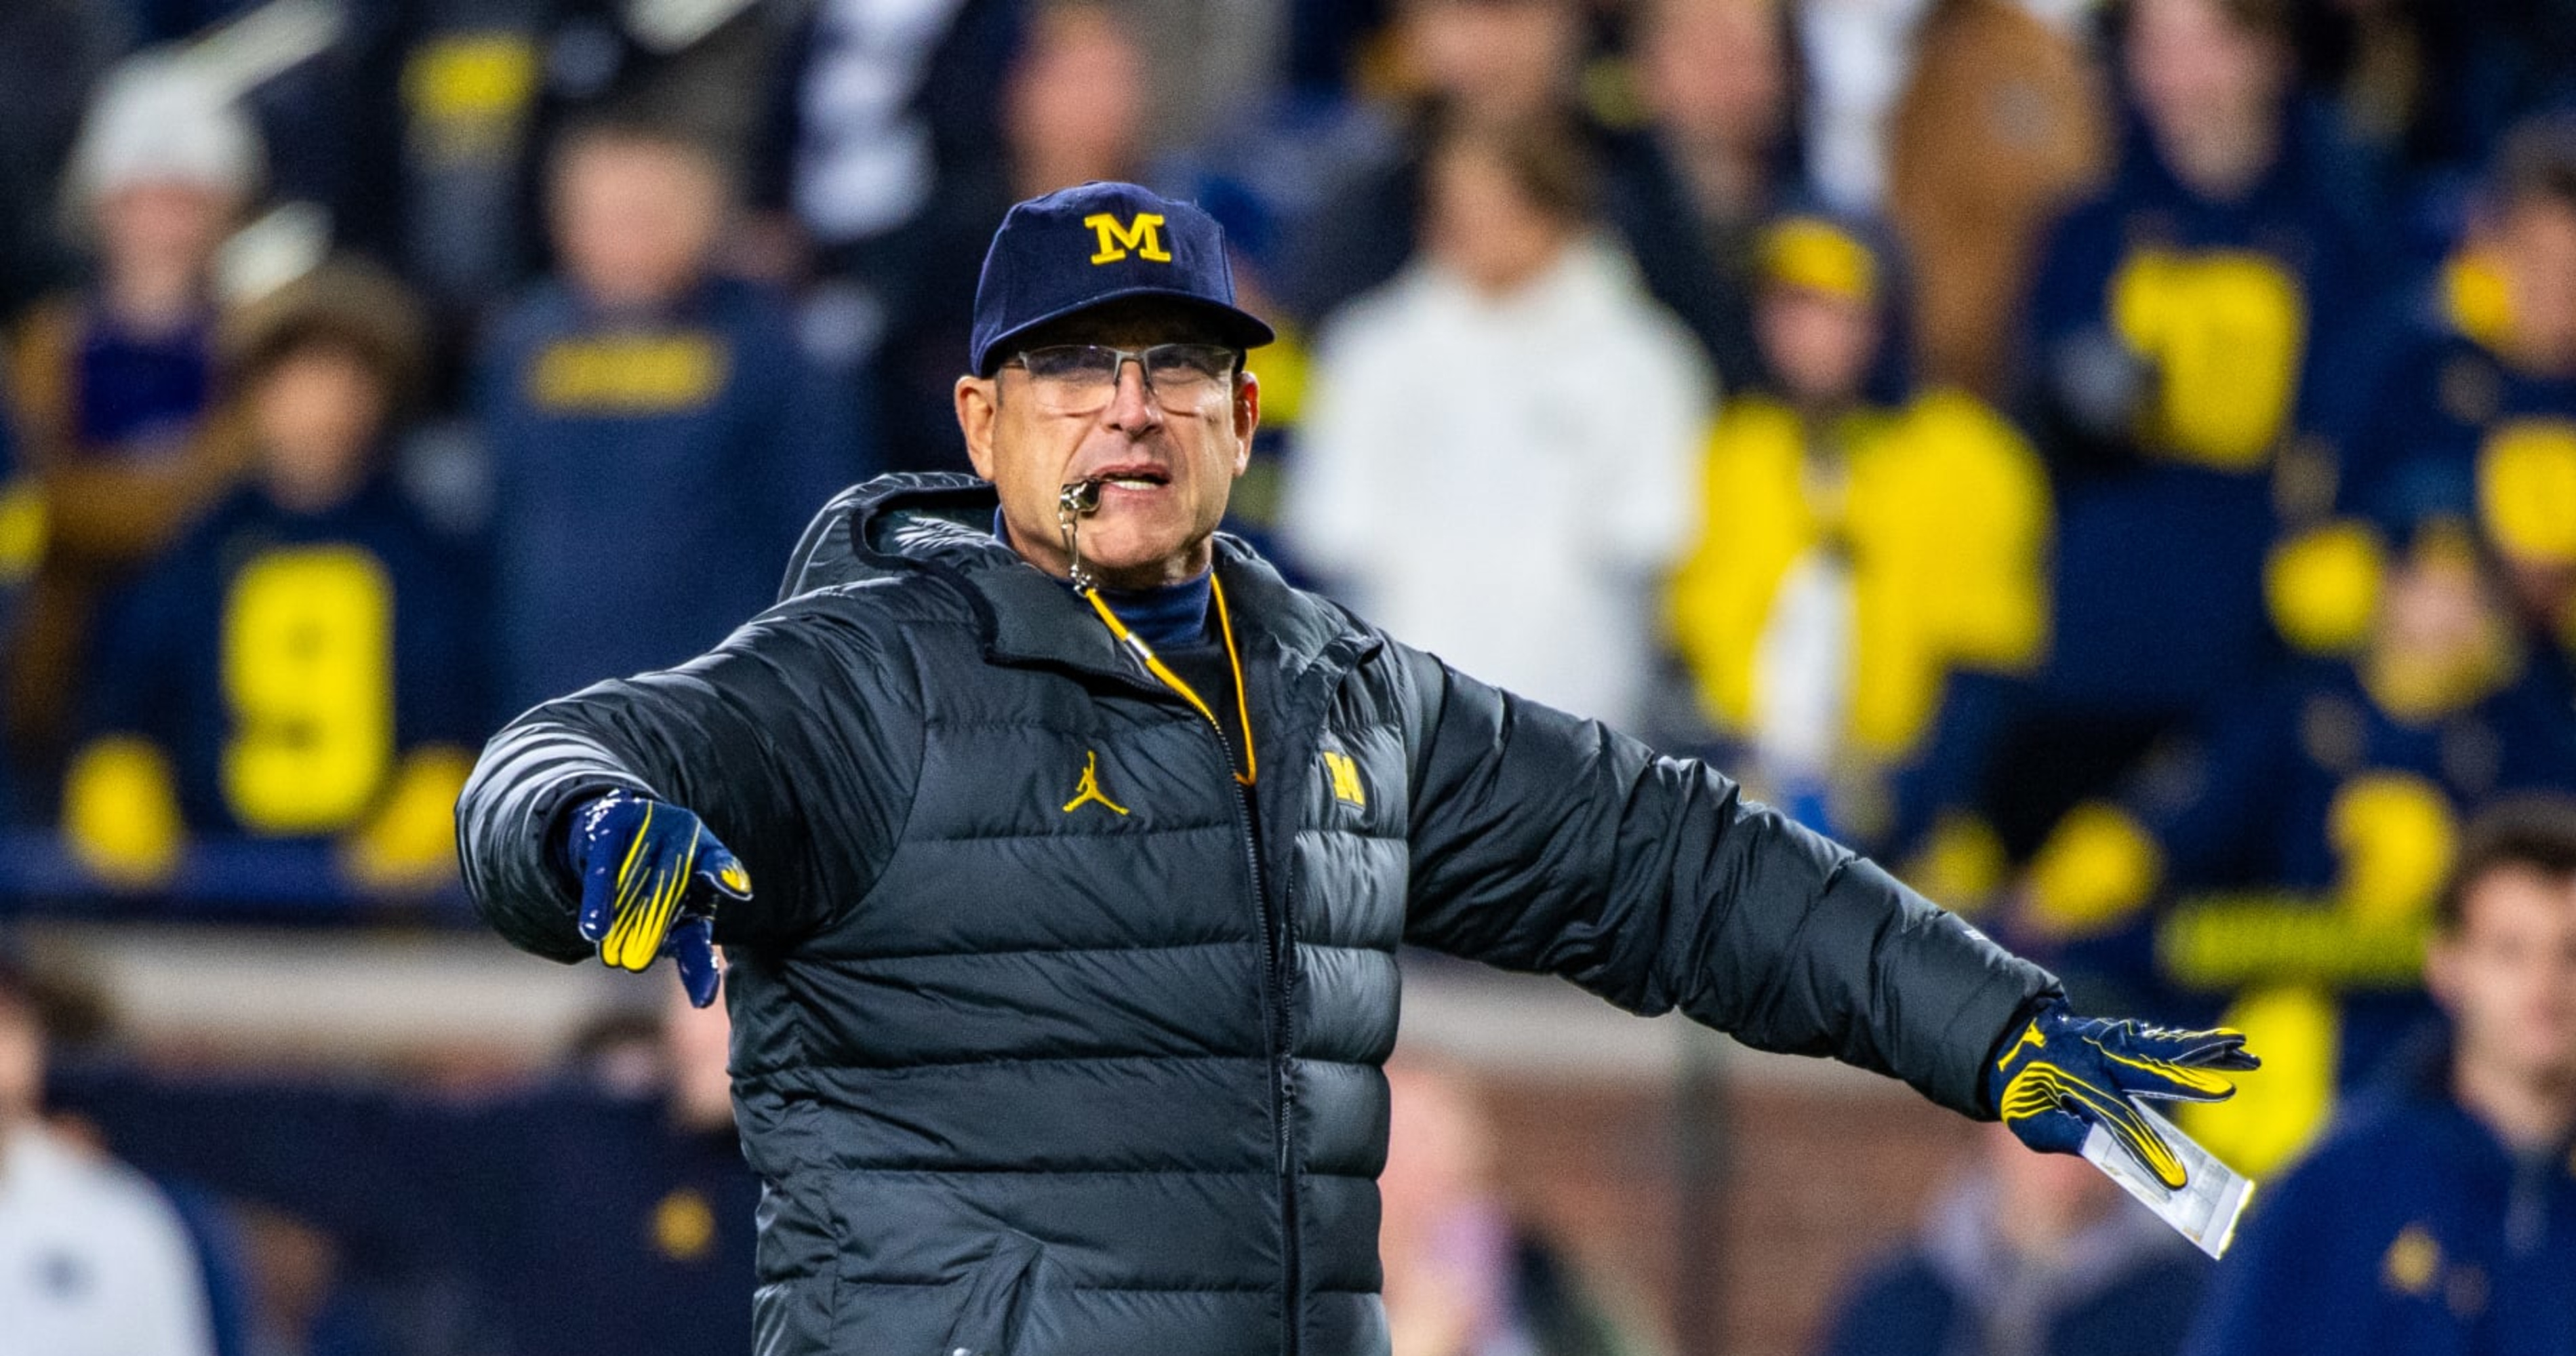 Report: Michigan Files for Temporary Restraining Order for Jim Harbaugh's Suspension